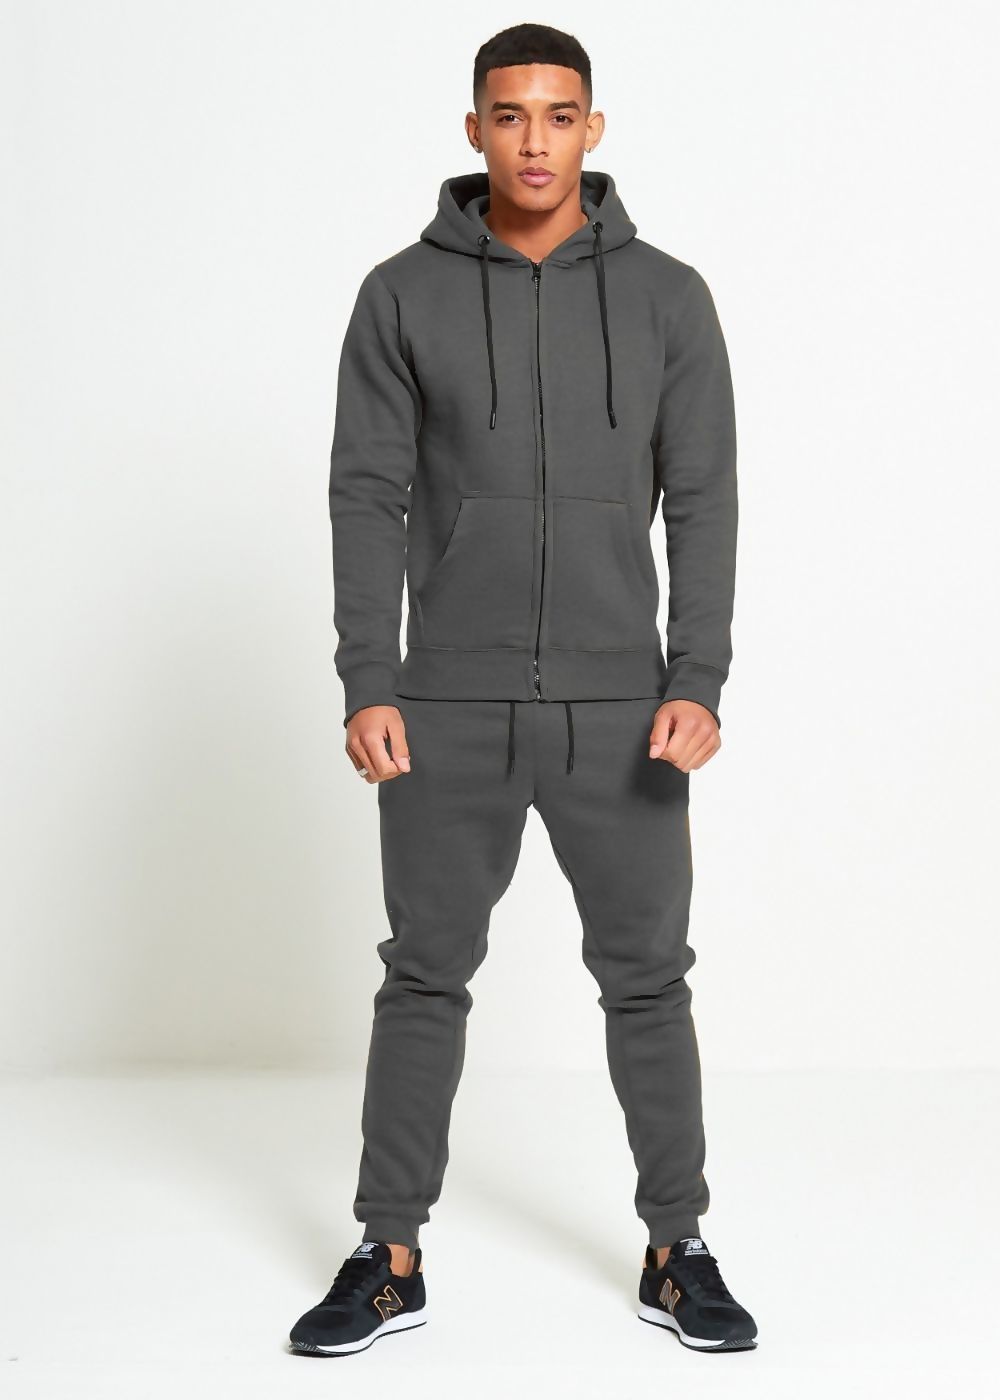 Charcoal Comfy Hooded Tracksuit Set with Zipper